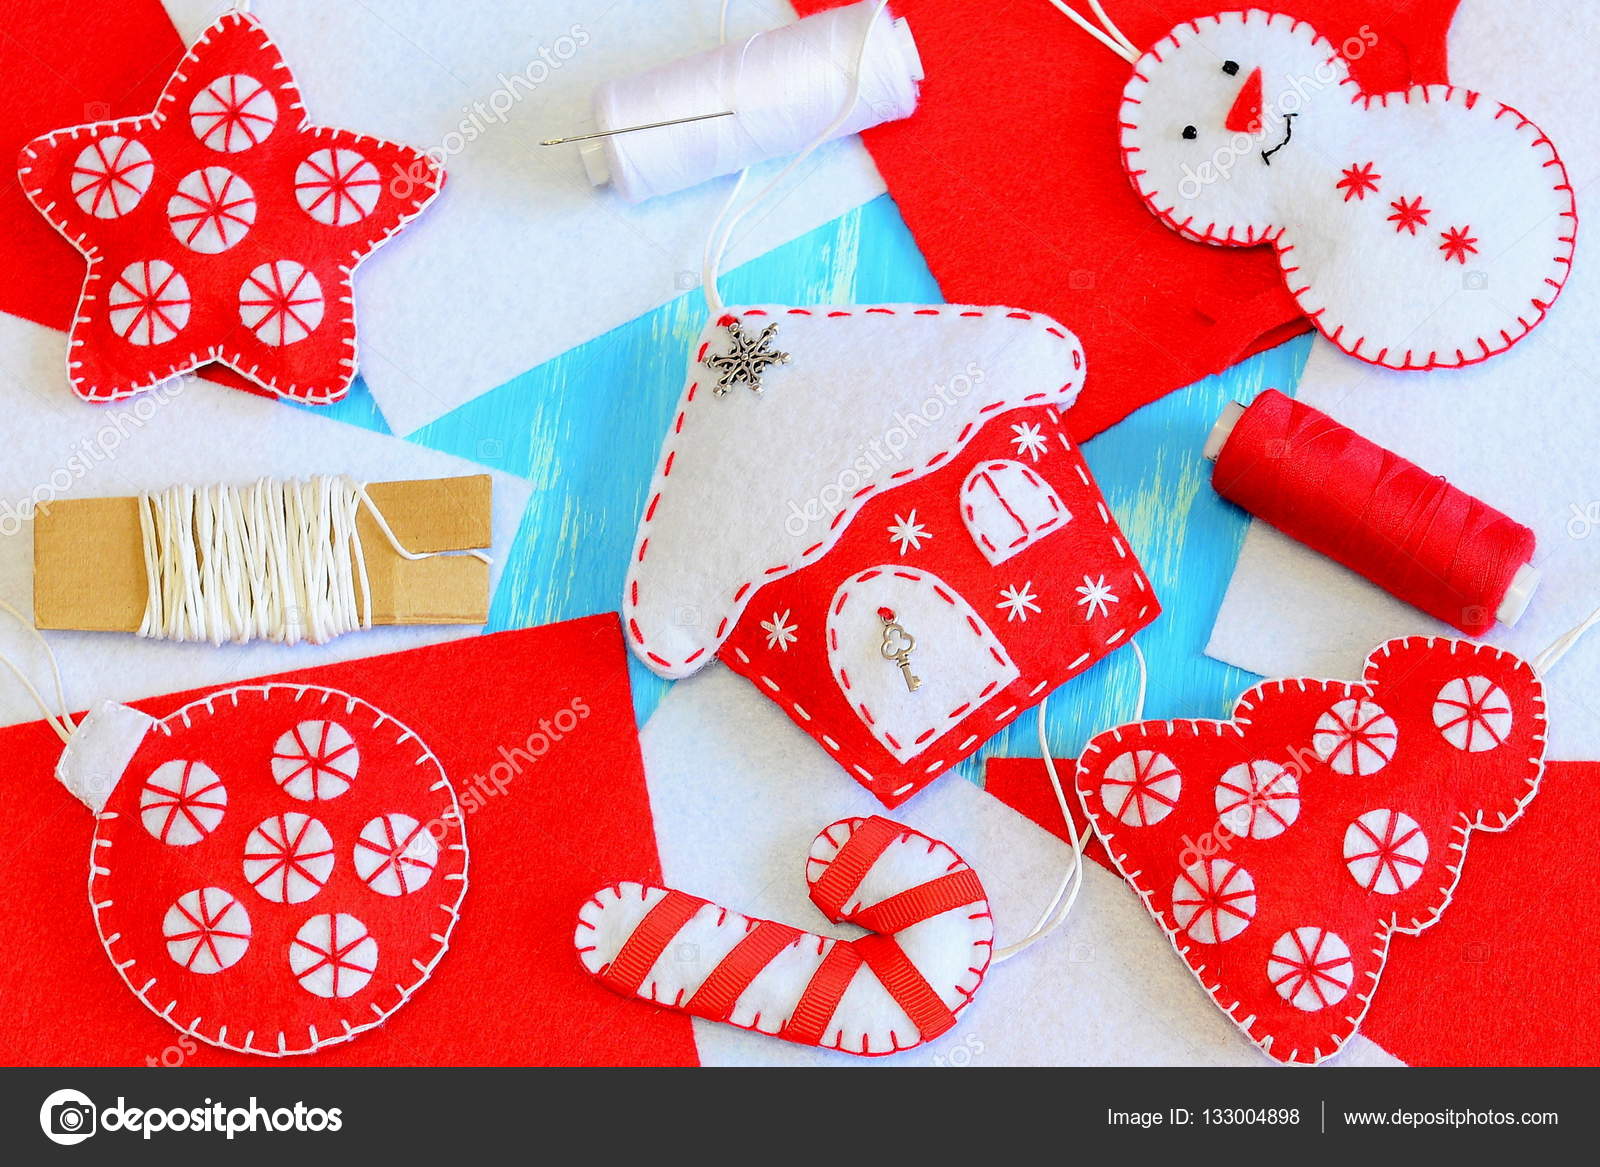 Easy Christmas crafts for adults or kids to make. Felt star, Christmas  tree, snowman and ball